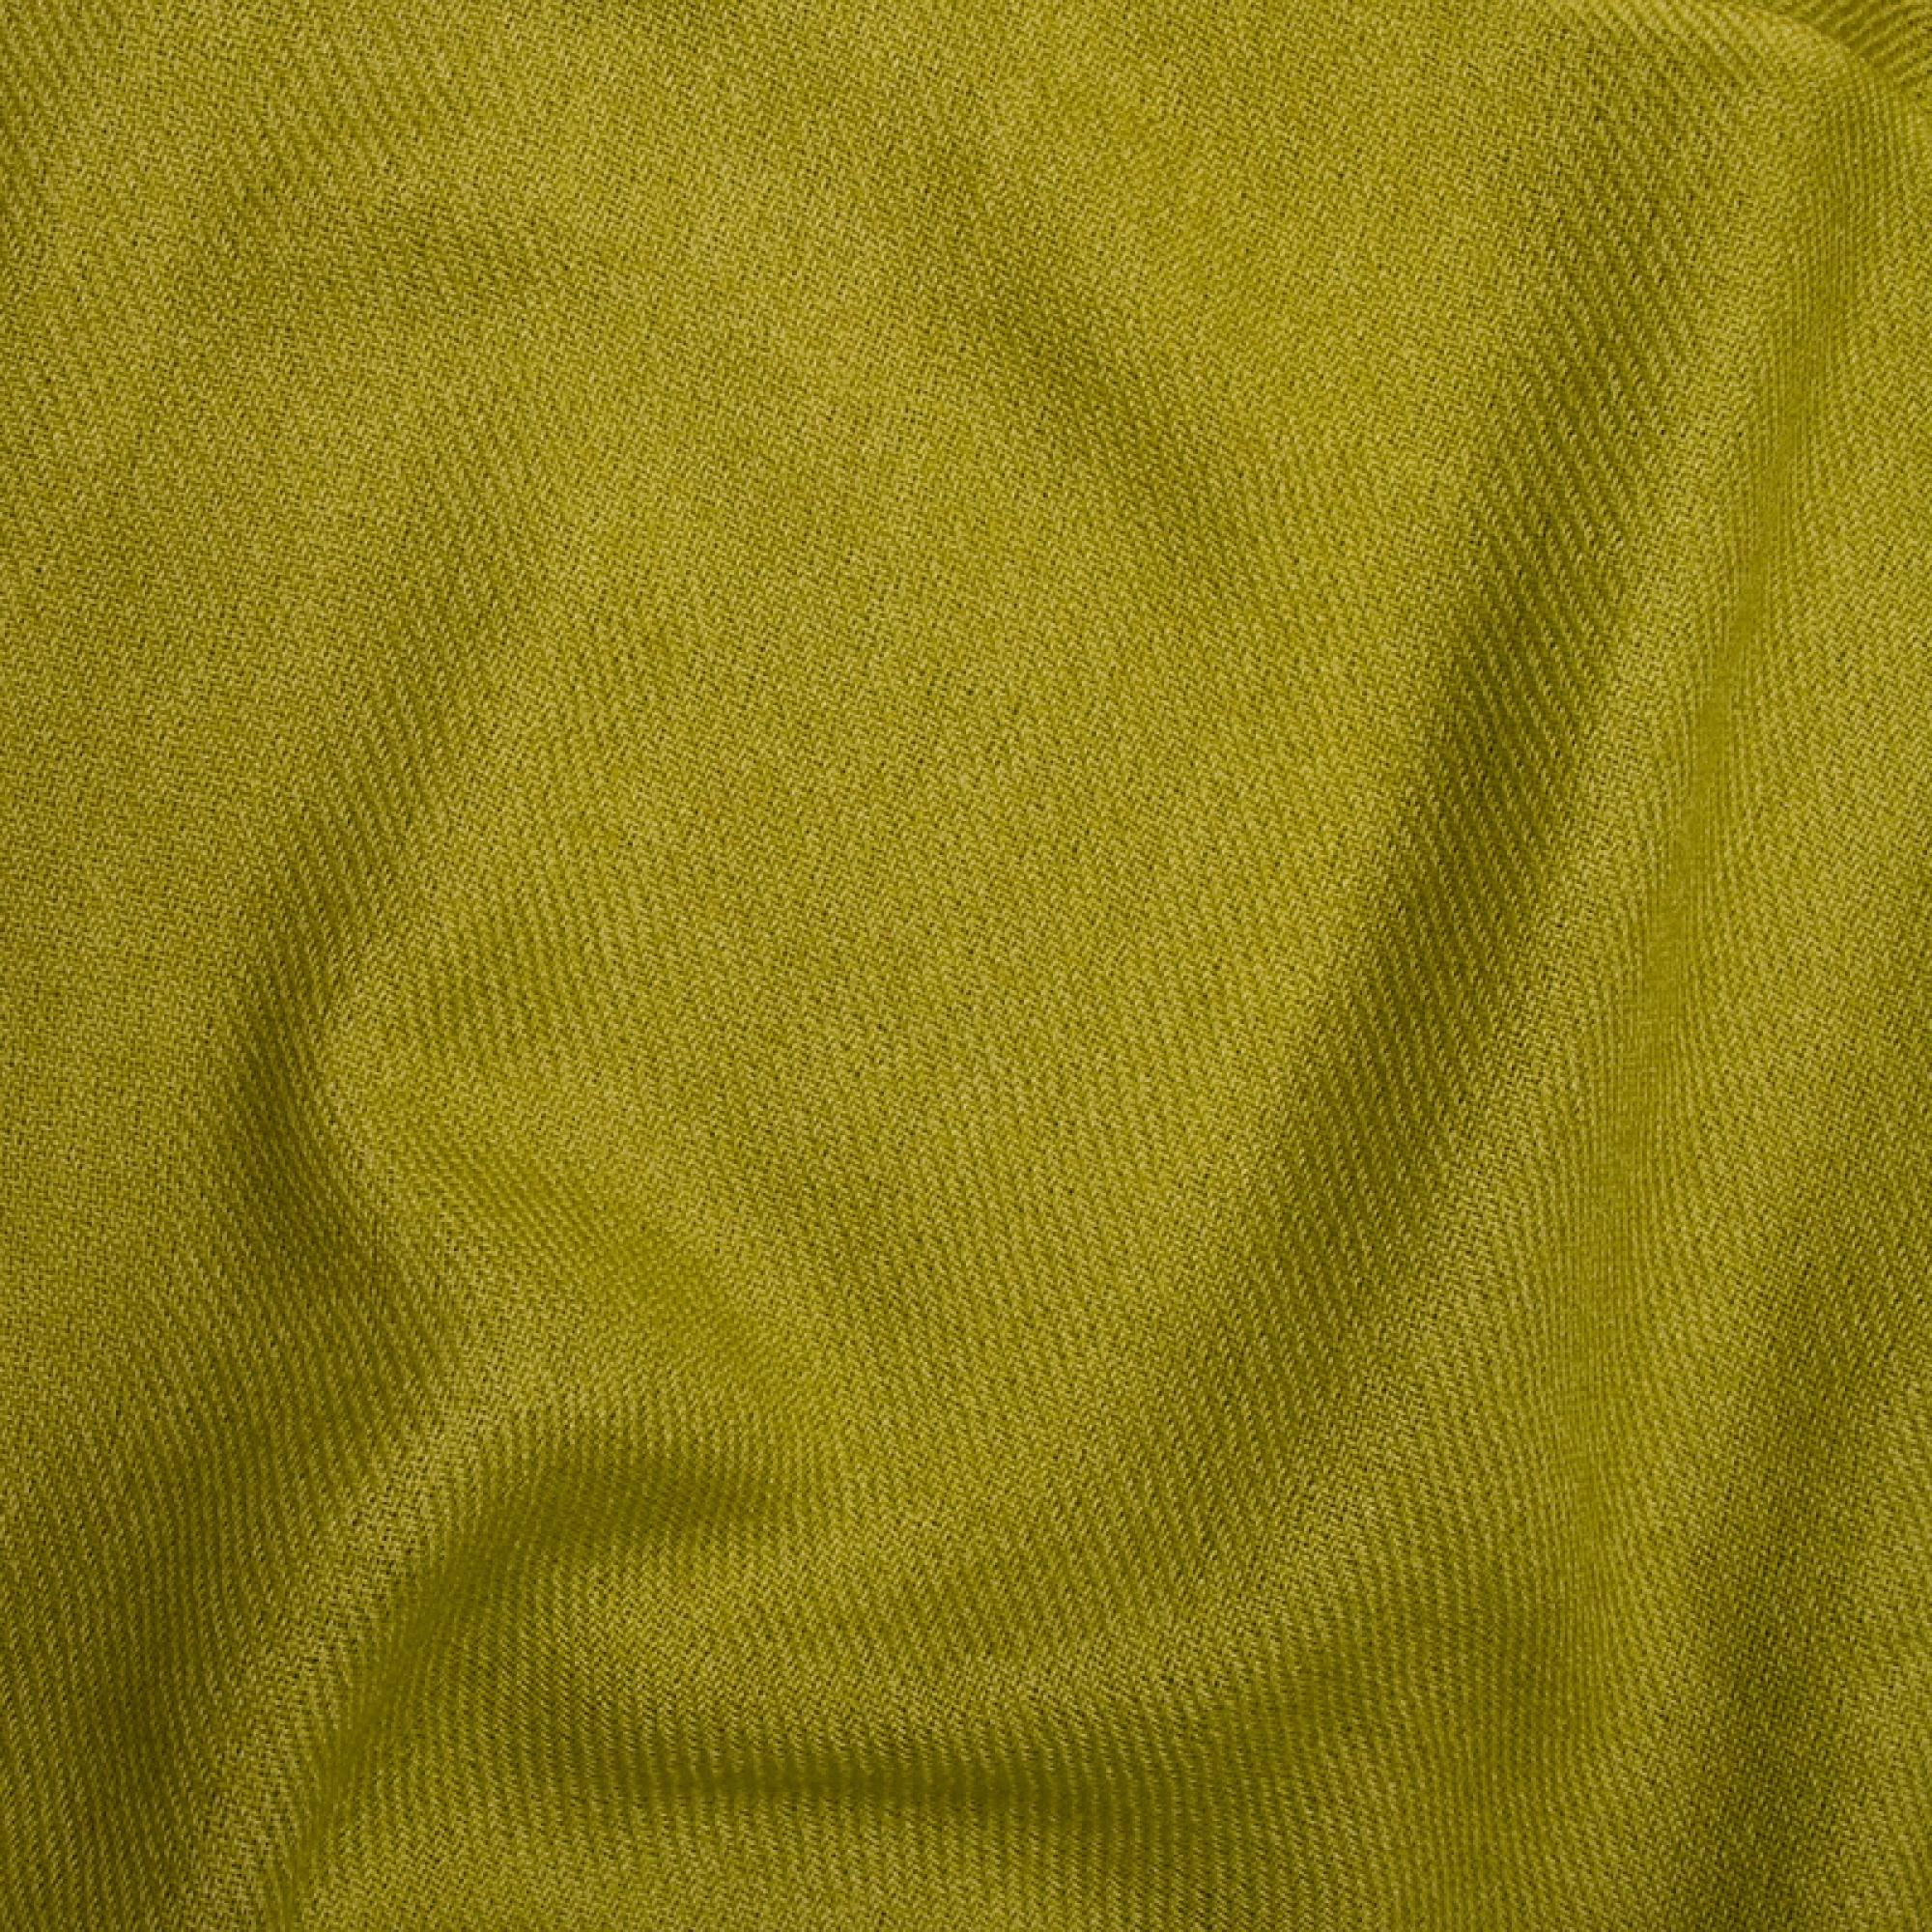 Cashmere accessories blanket frisbi 147 x 203 lime punch 147 x 203 cm